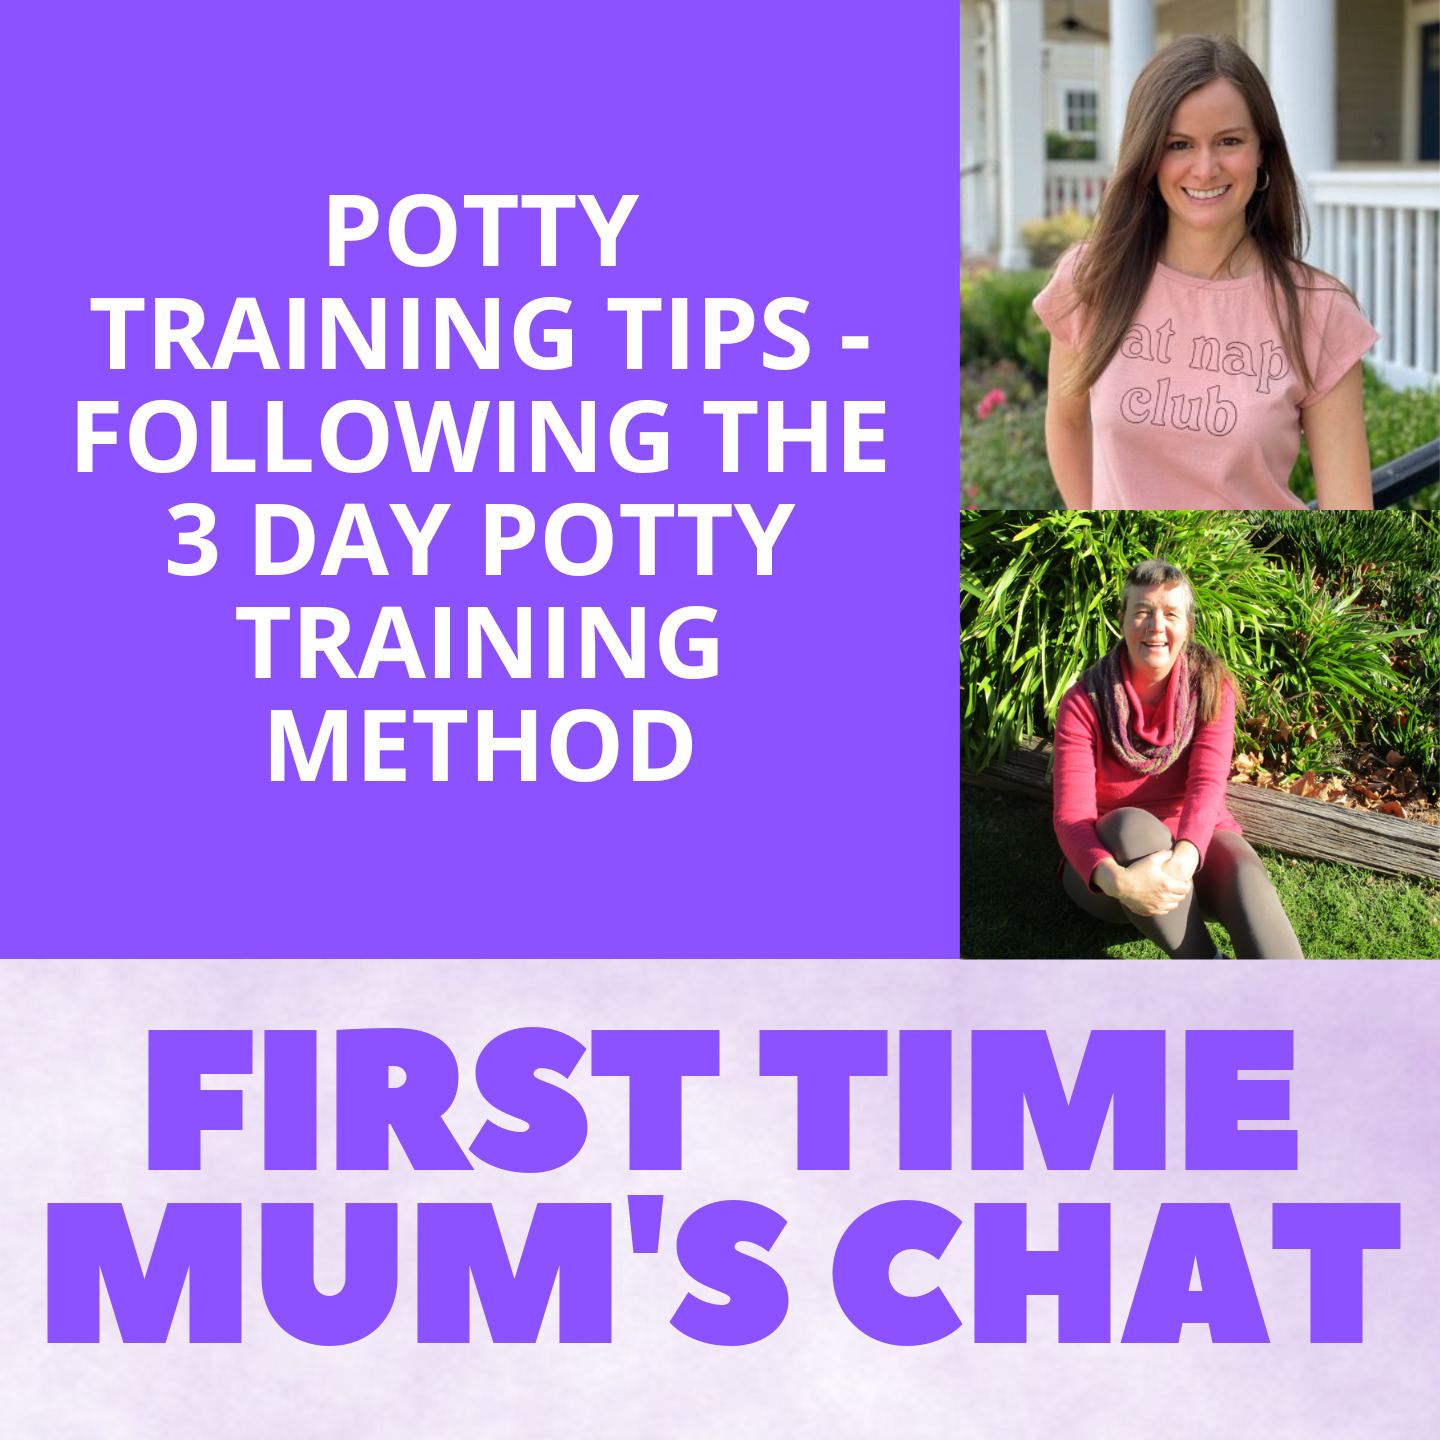 Potty Training Tips - Following the 3 Day Potty Training Method